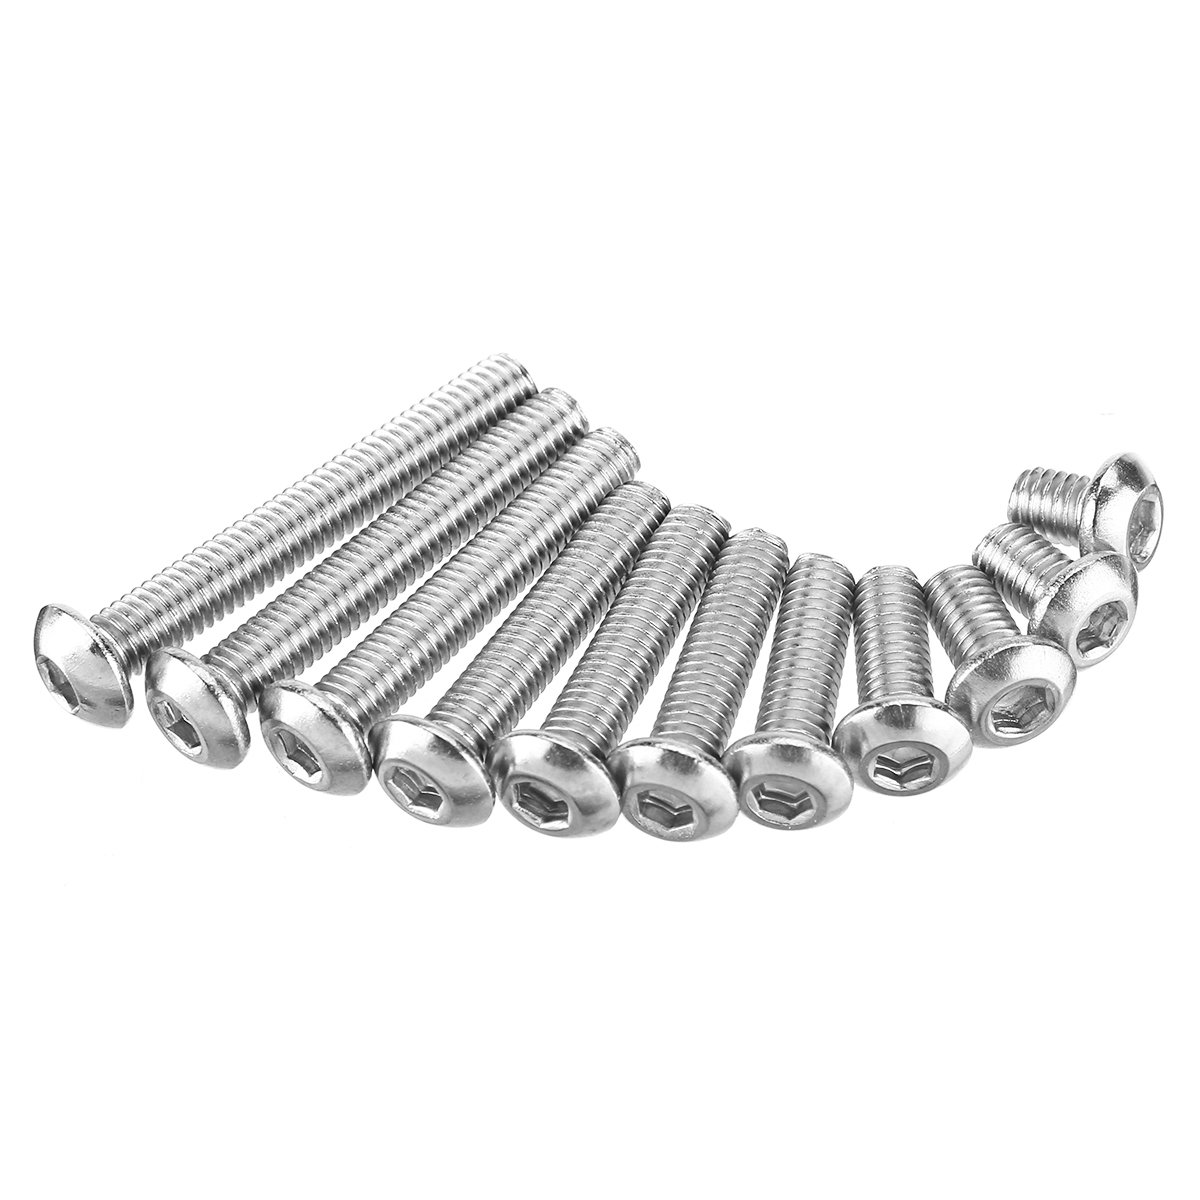 

50pcs Metric M3 Stainless 4-22mm A2 Button Head Screw Bolt, White